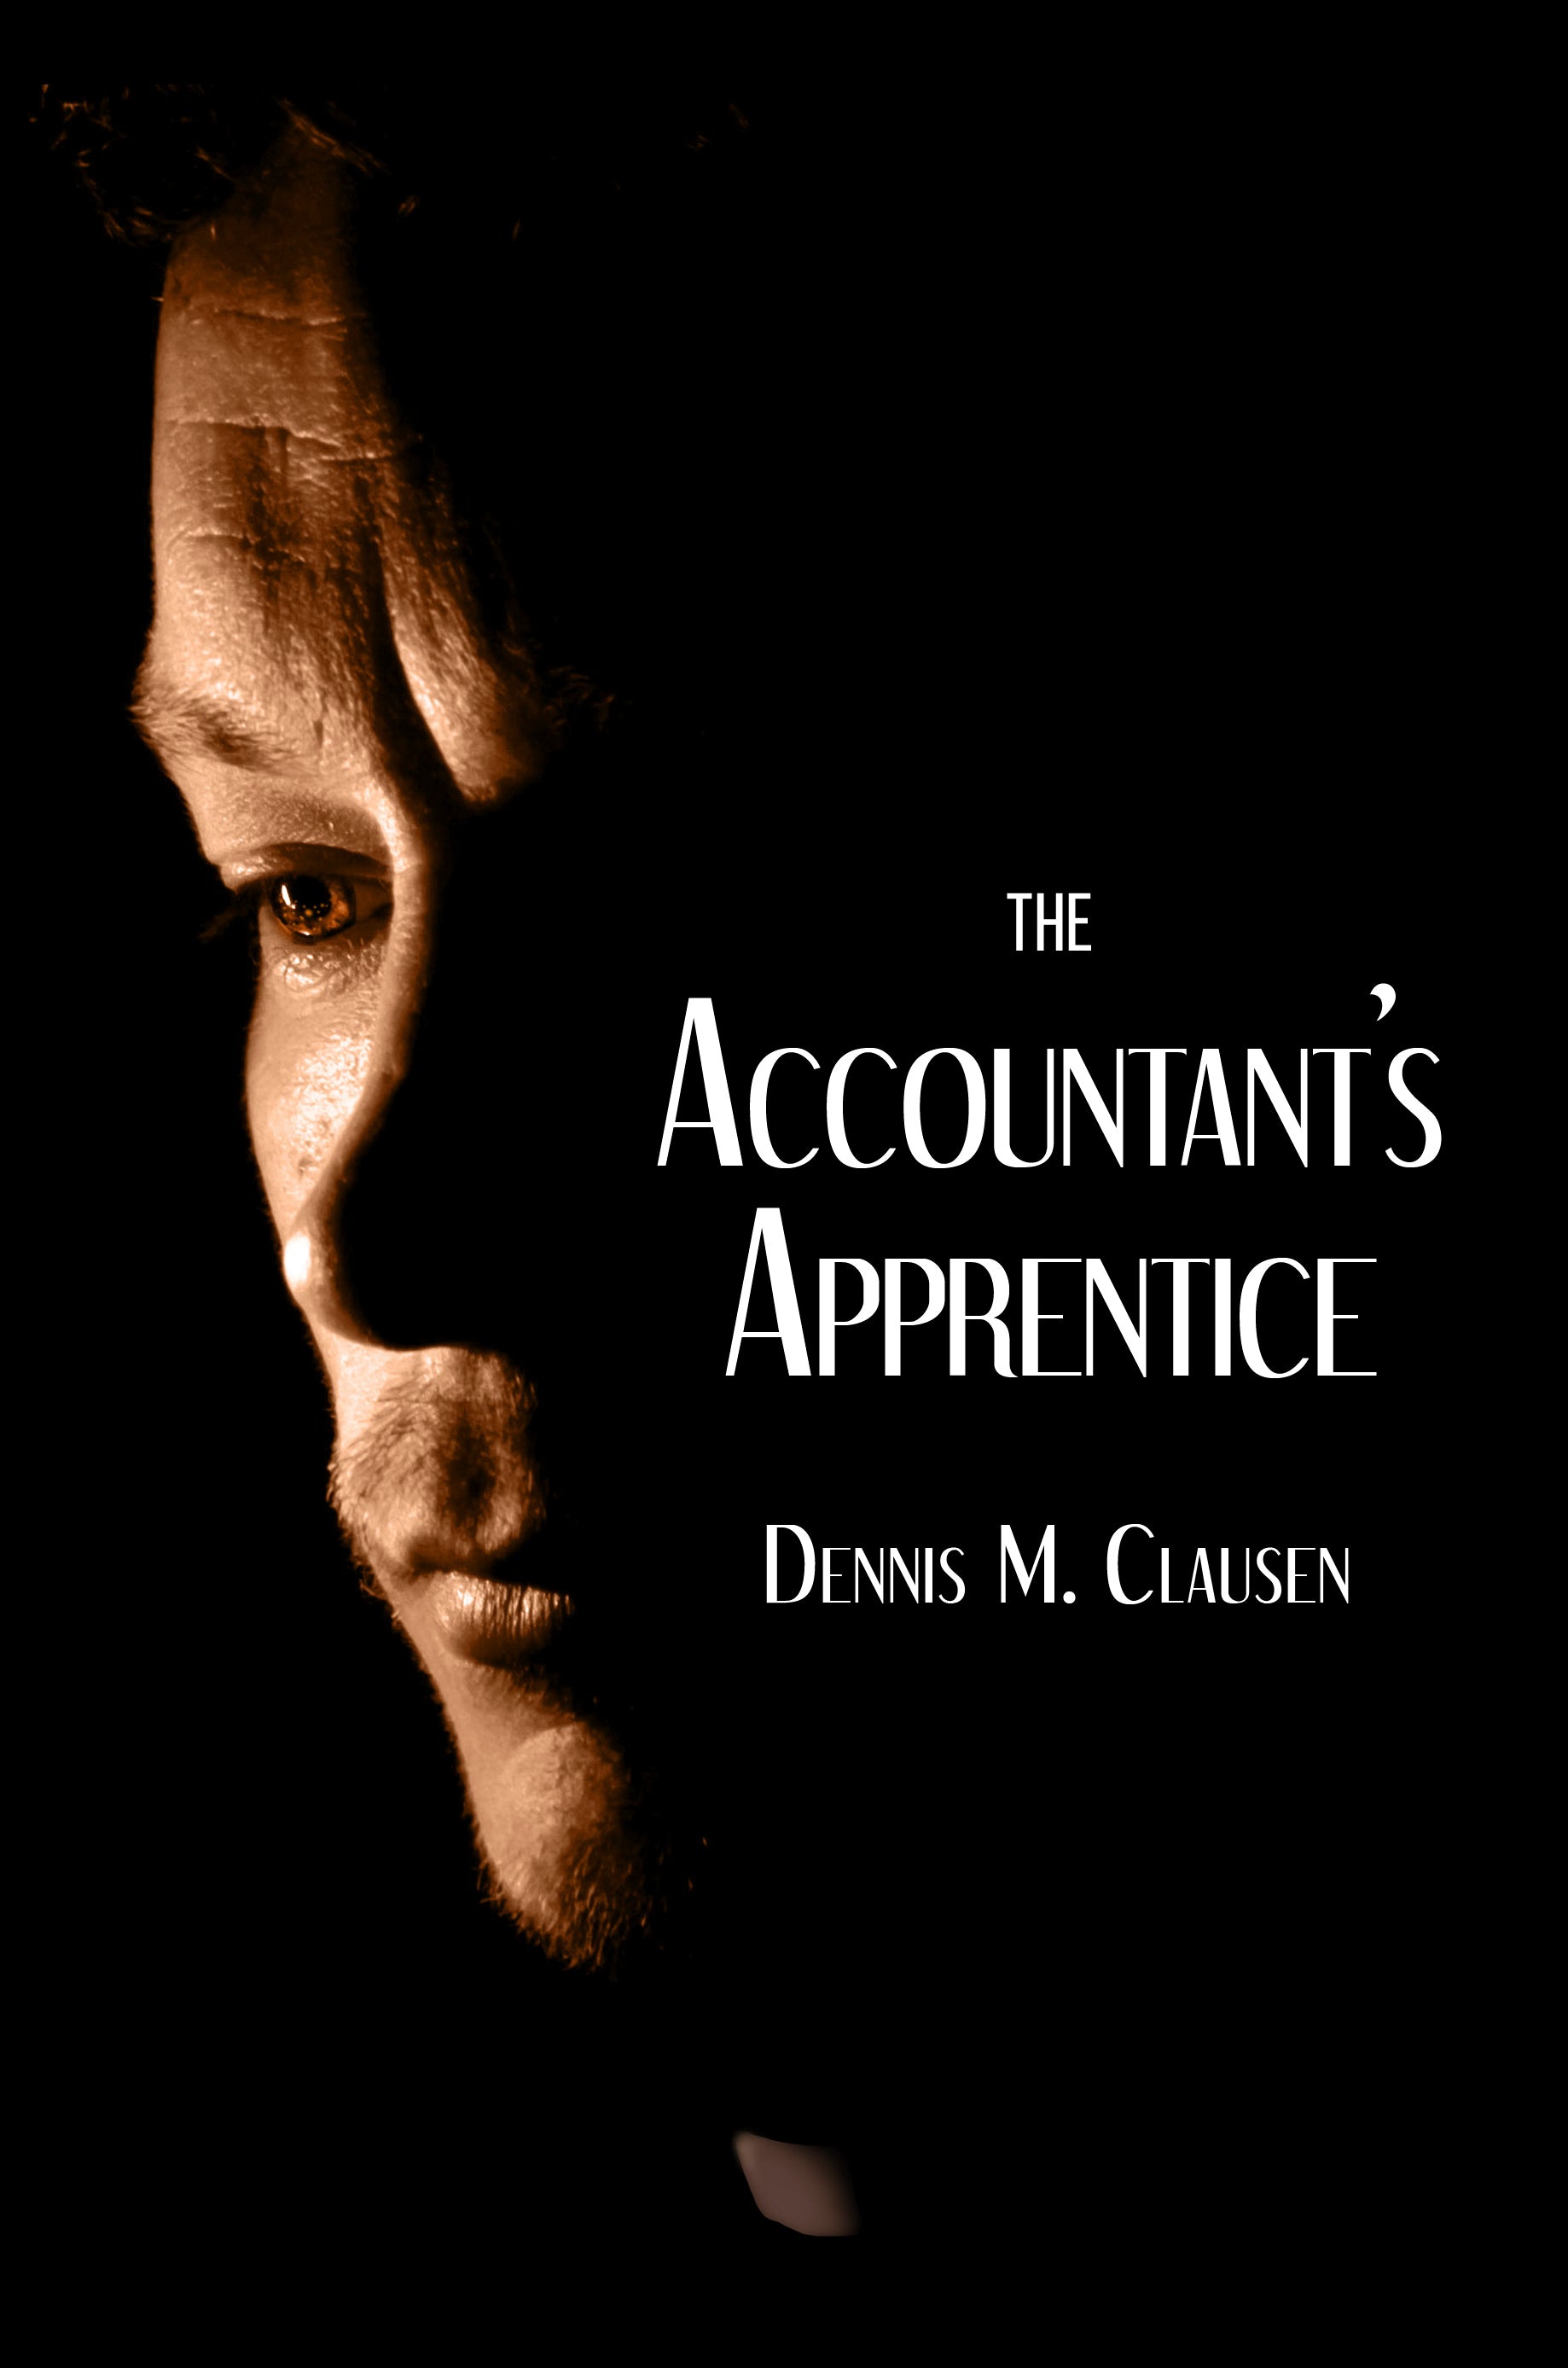 Dennis Clausen’s “The Accountant's Apprentice” is the Brown Posey Press bestseller for October